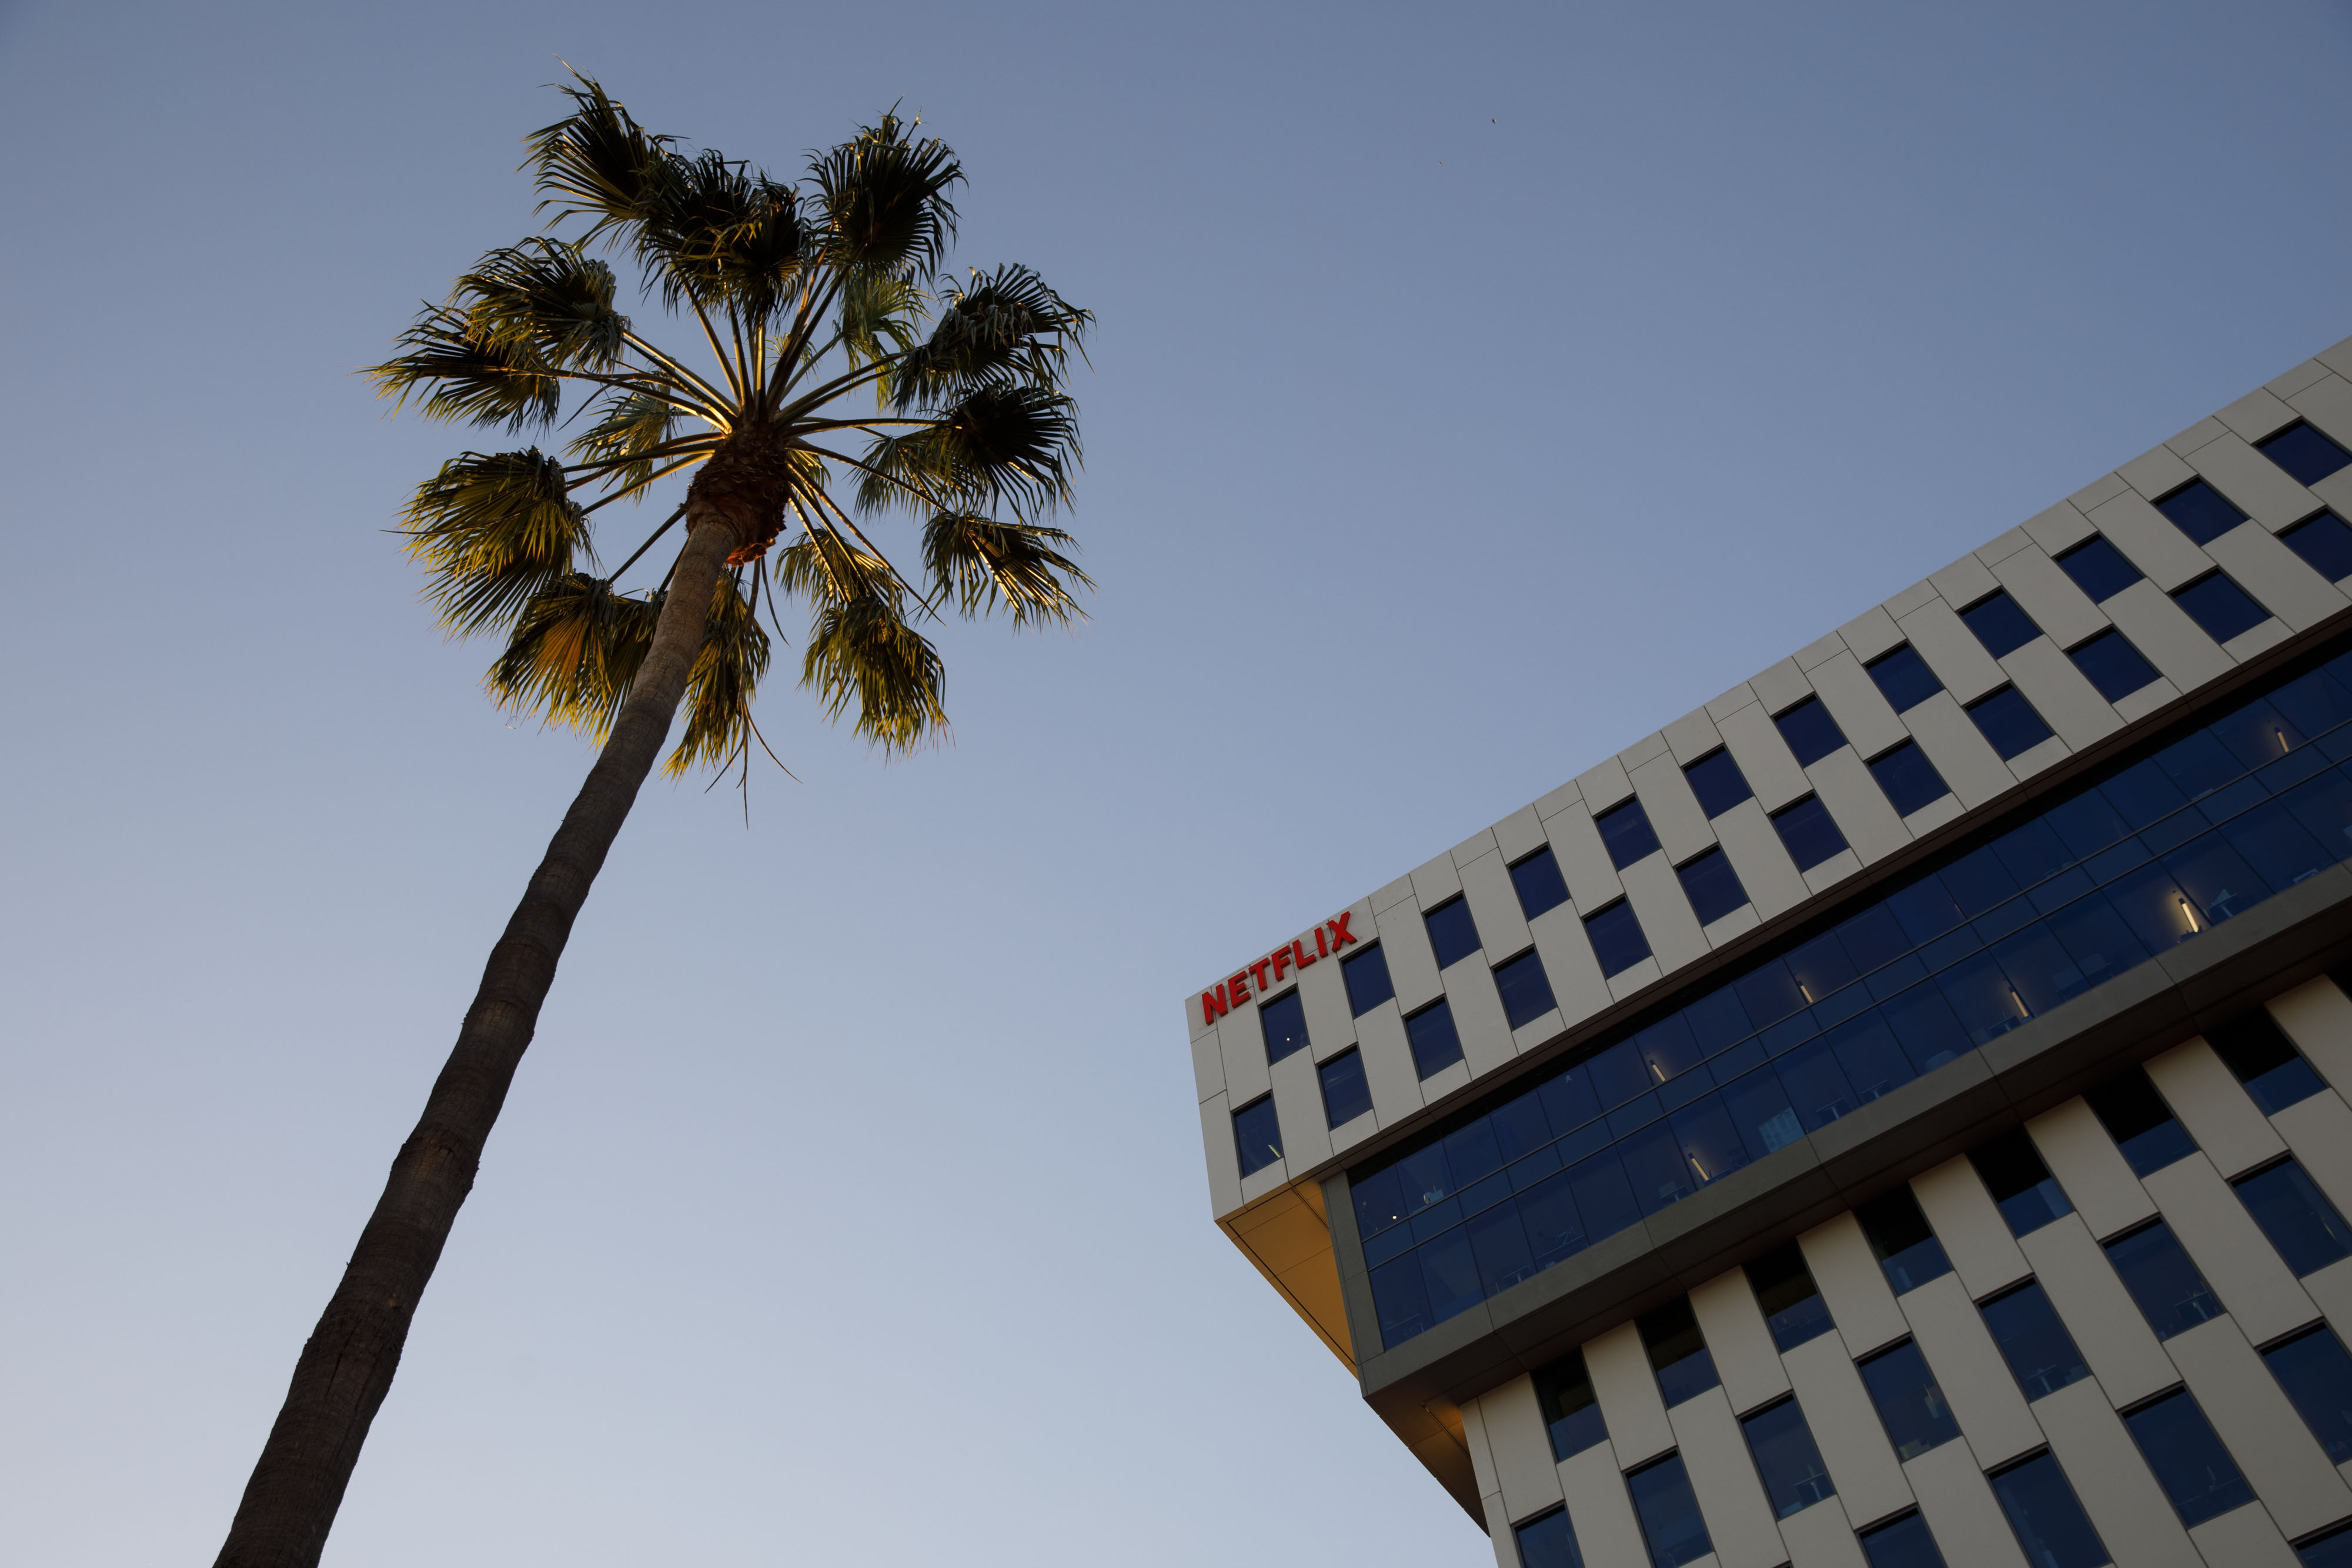 Netflix's Los Angeles office looms above a hapless palm tree.